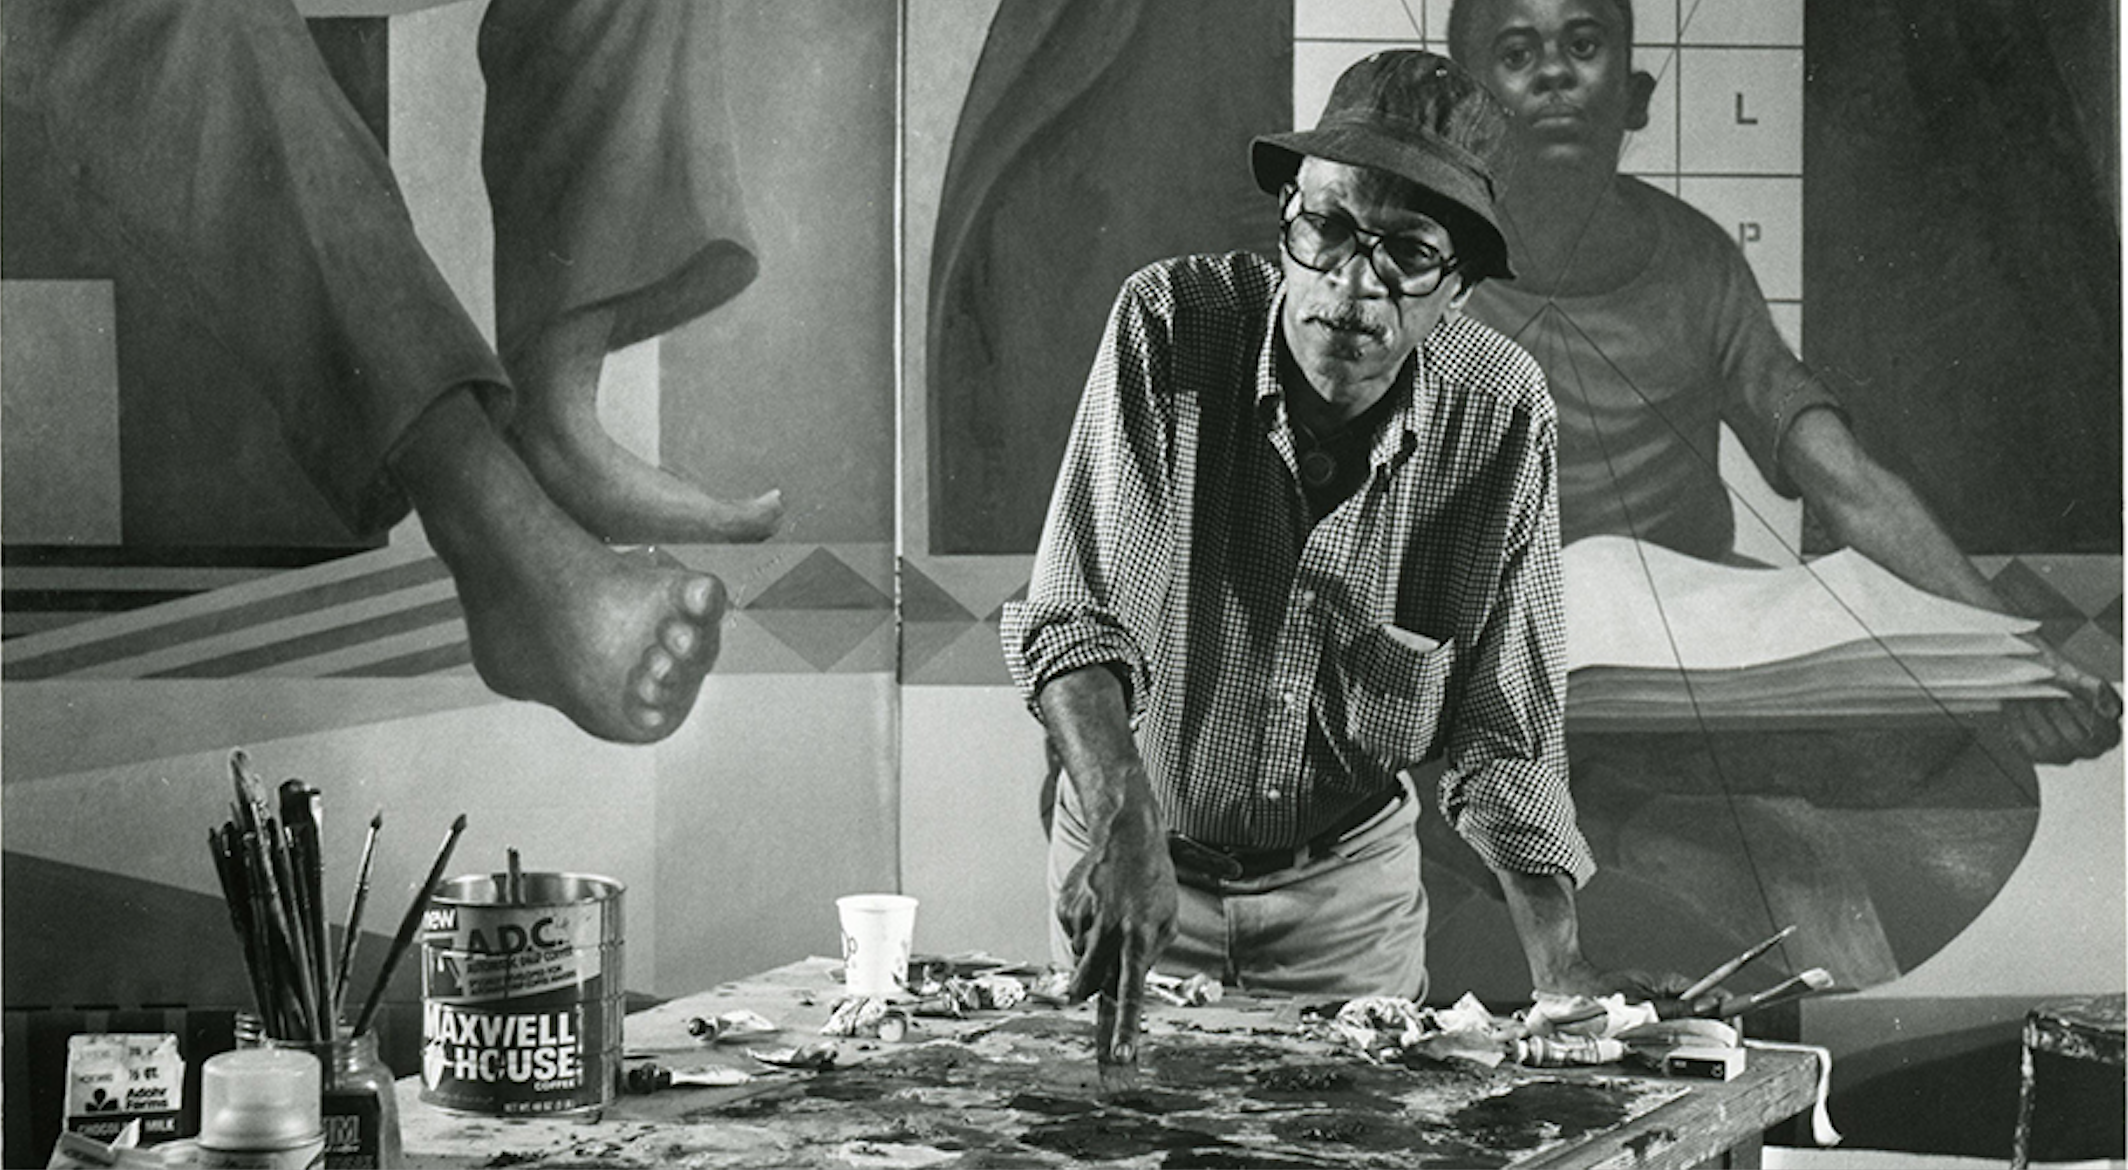 Legacy of Influential Artist Charles White Honored With New Scholarship at Otis College of Art and Design in Los Angeles